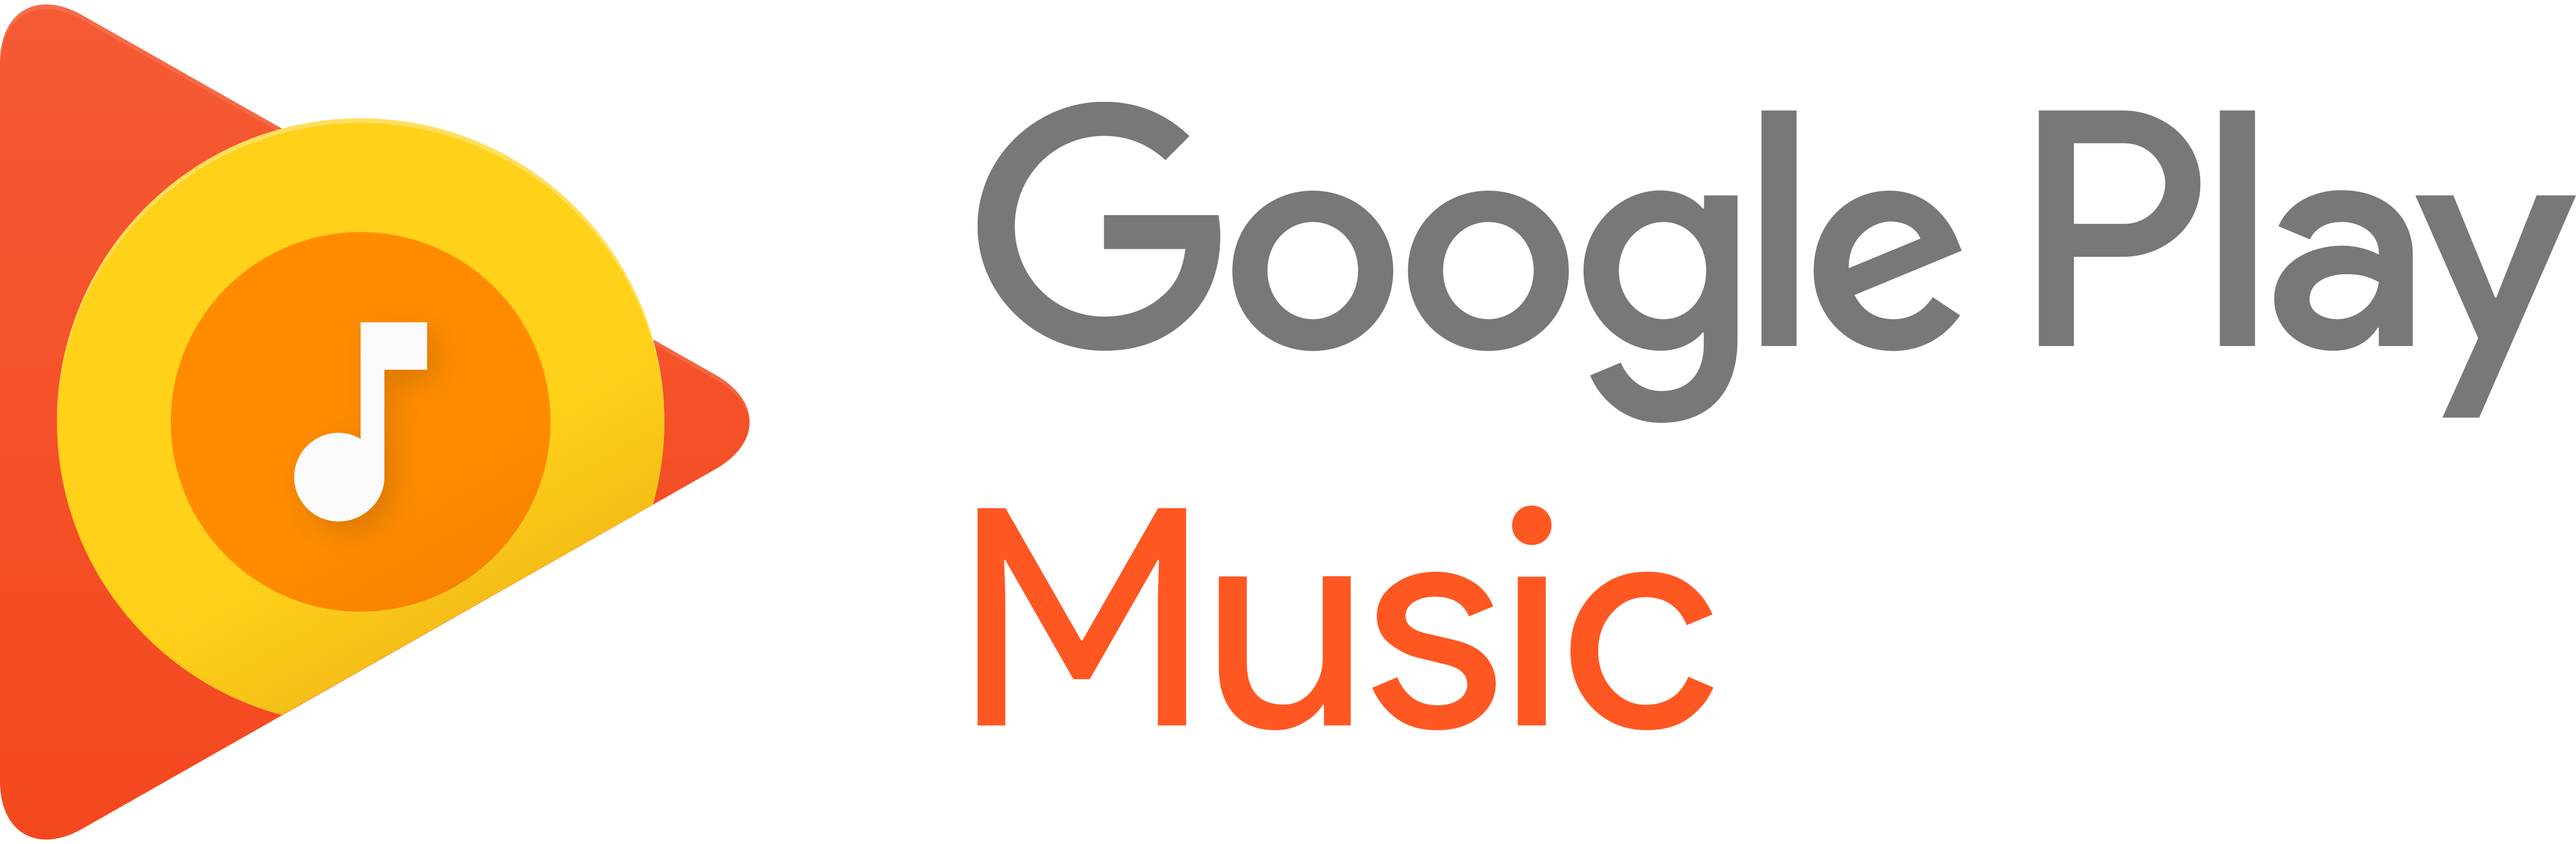 Alphabet Inc (Googl) Gets Serious About Music With 4 Month Trial Offer - Alphabet Inc, Transparent background PNG HD thumbnail